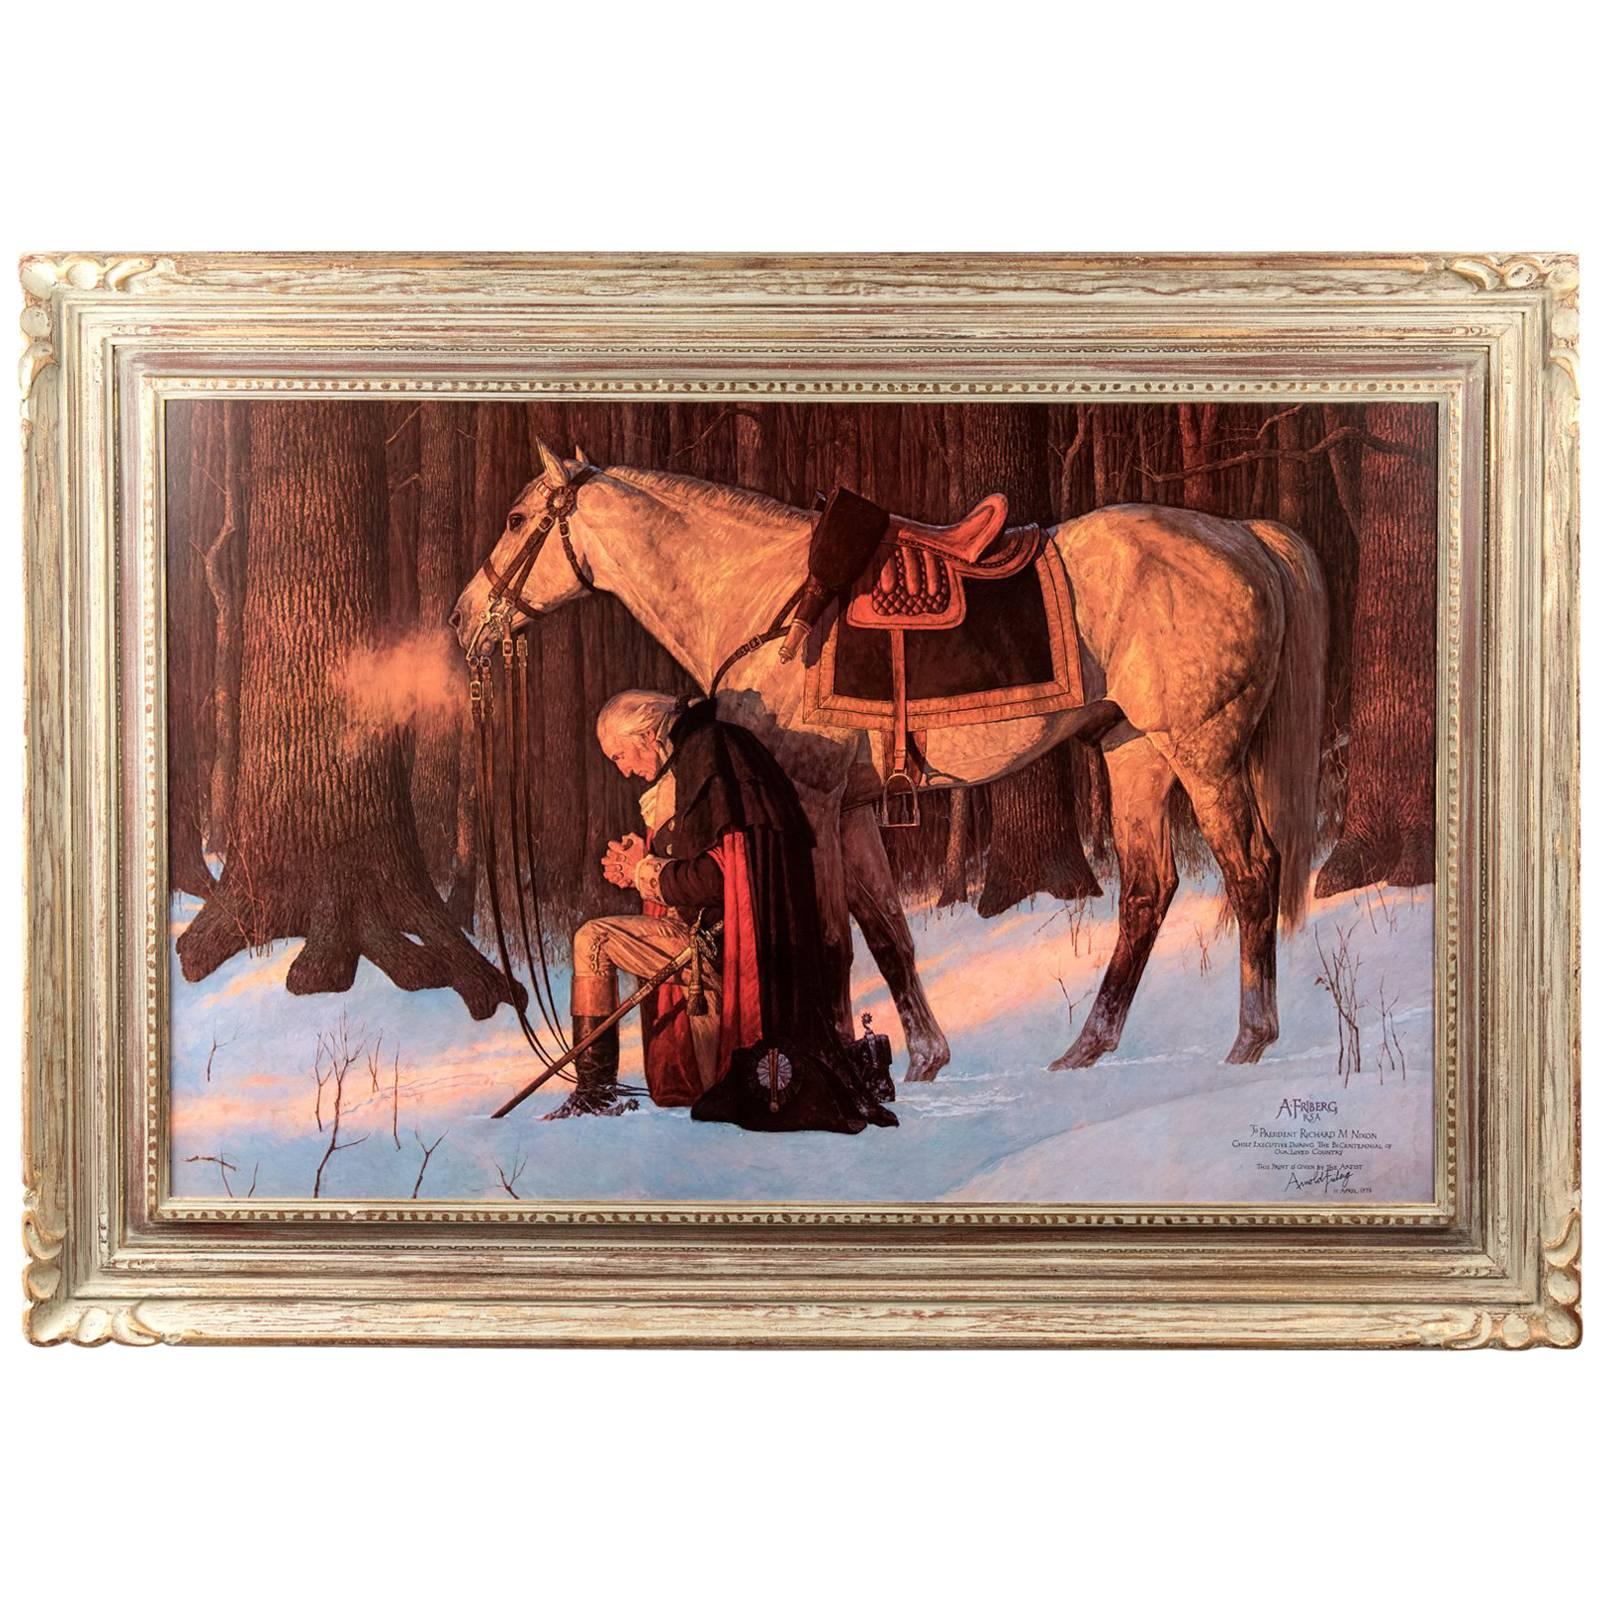 Prayer at Valley Forge by Arnold Friberg Dedicated to Richard Nixon